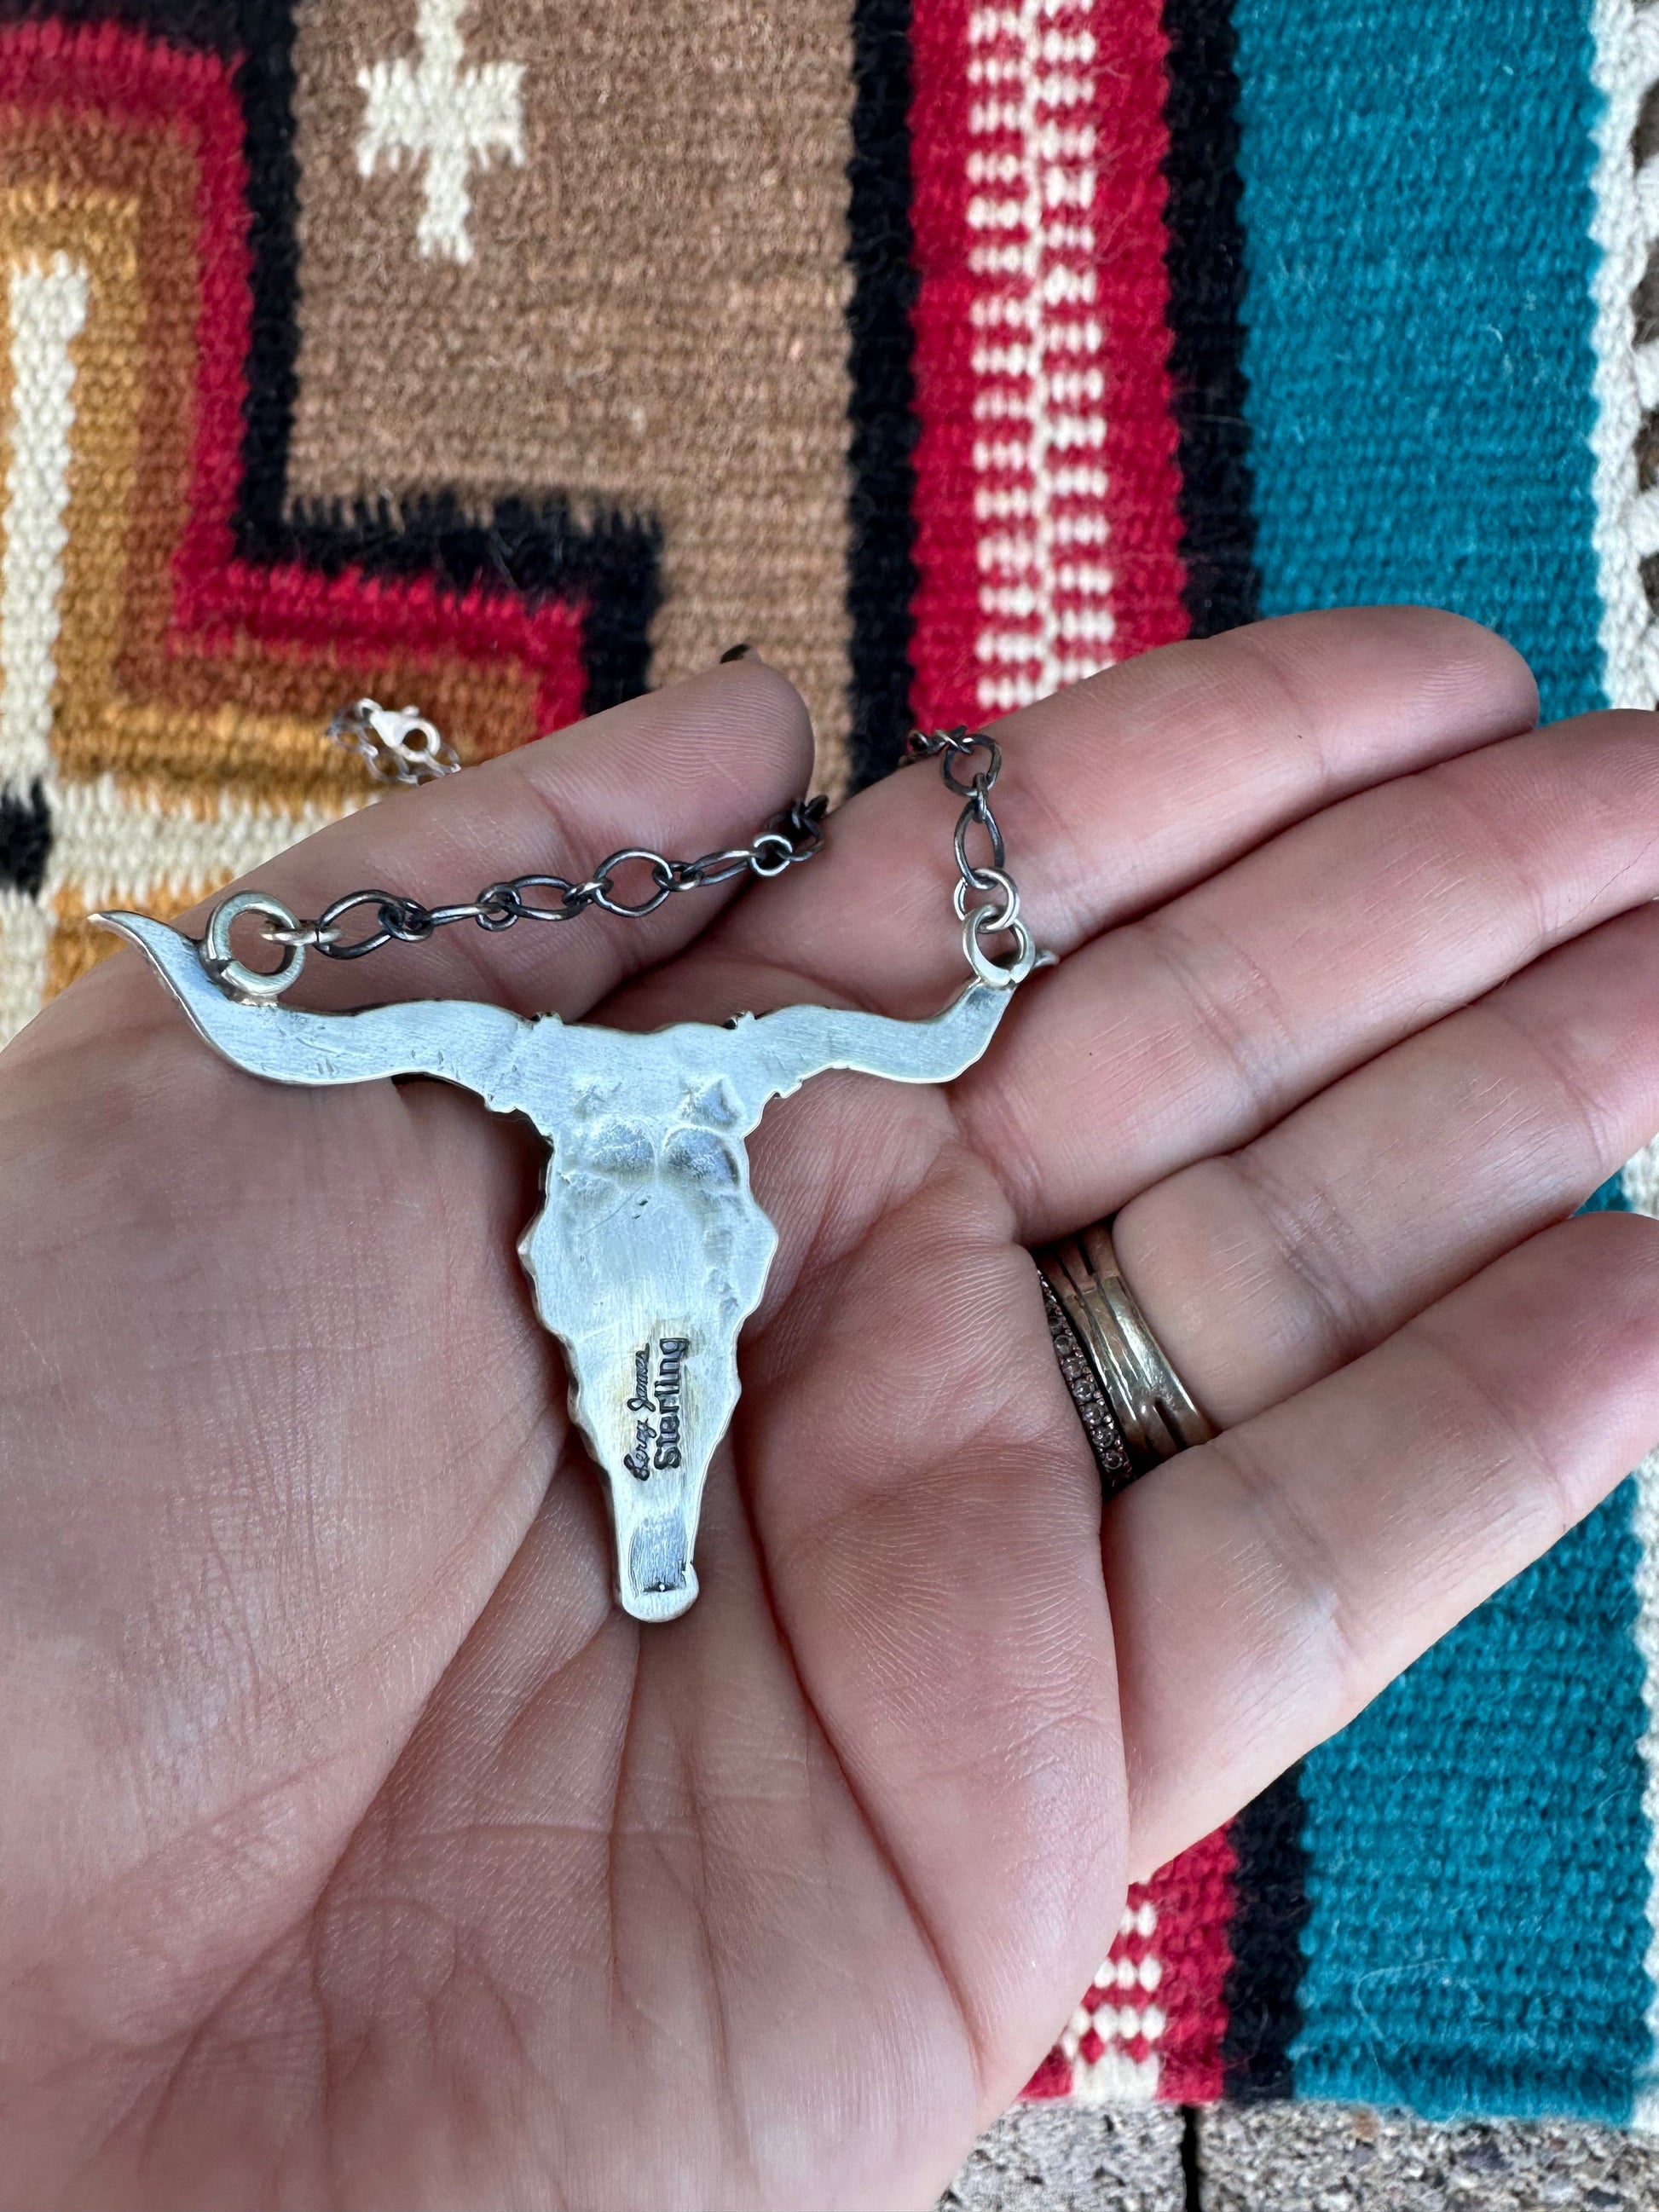 Cow Skull Necklace